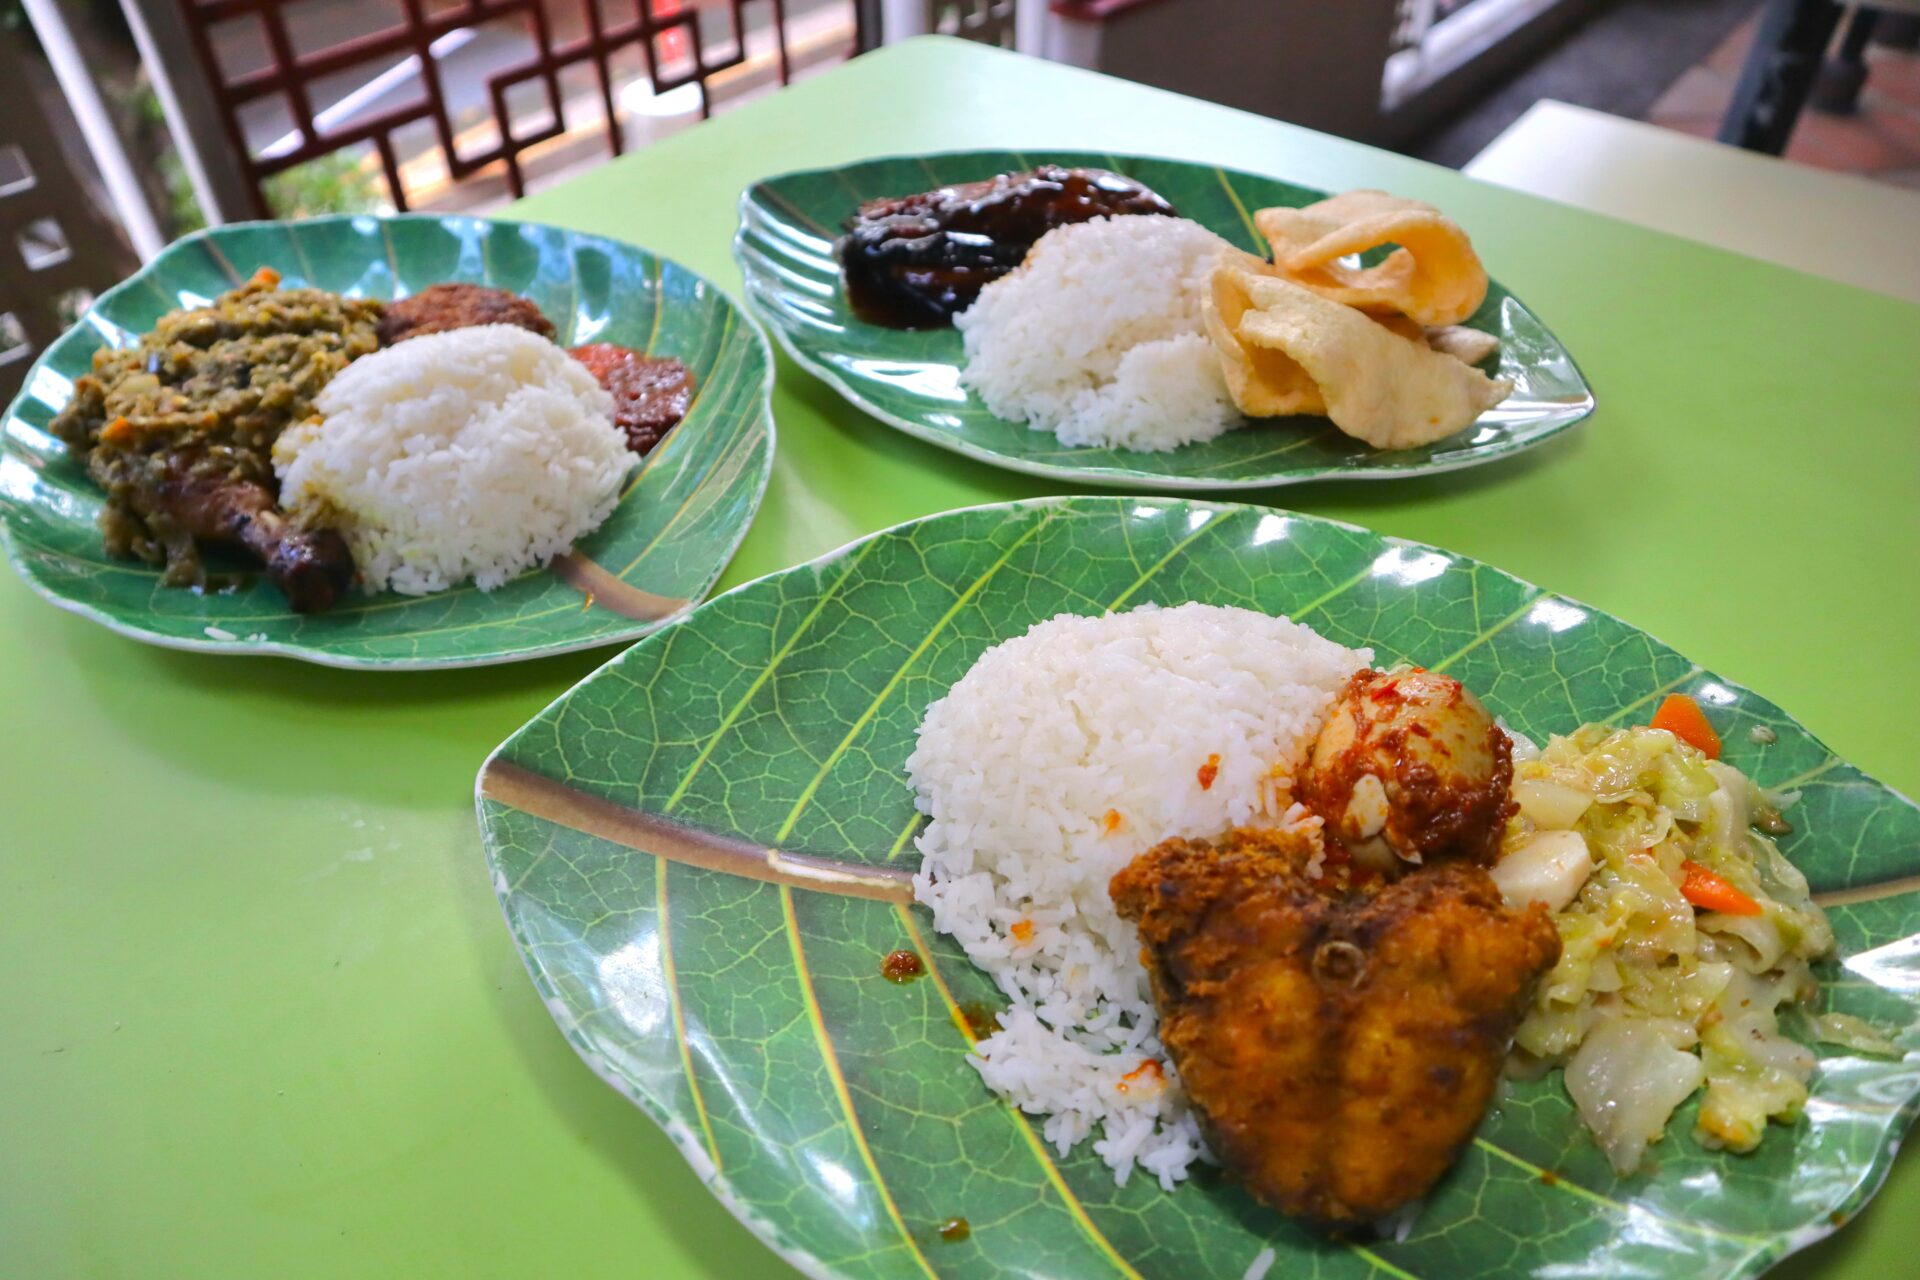 anthony indonesian cuisine - overview